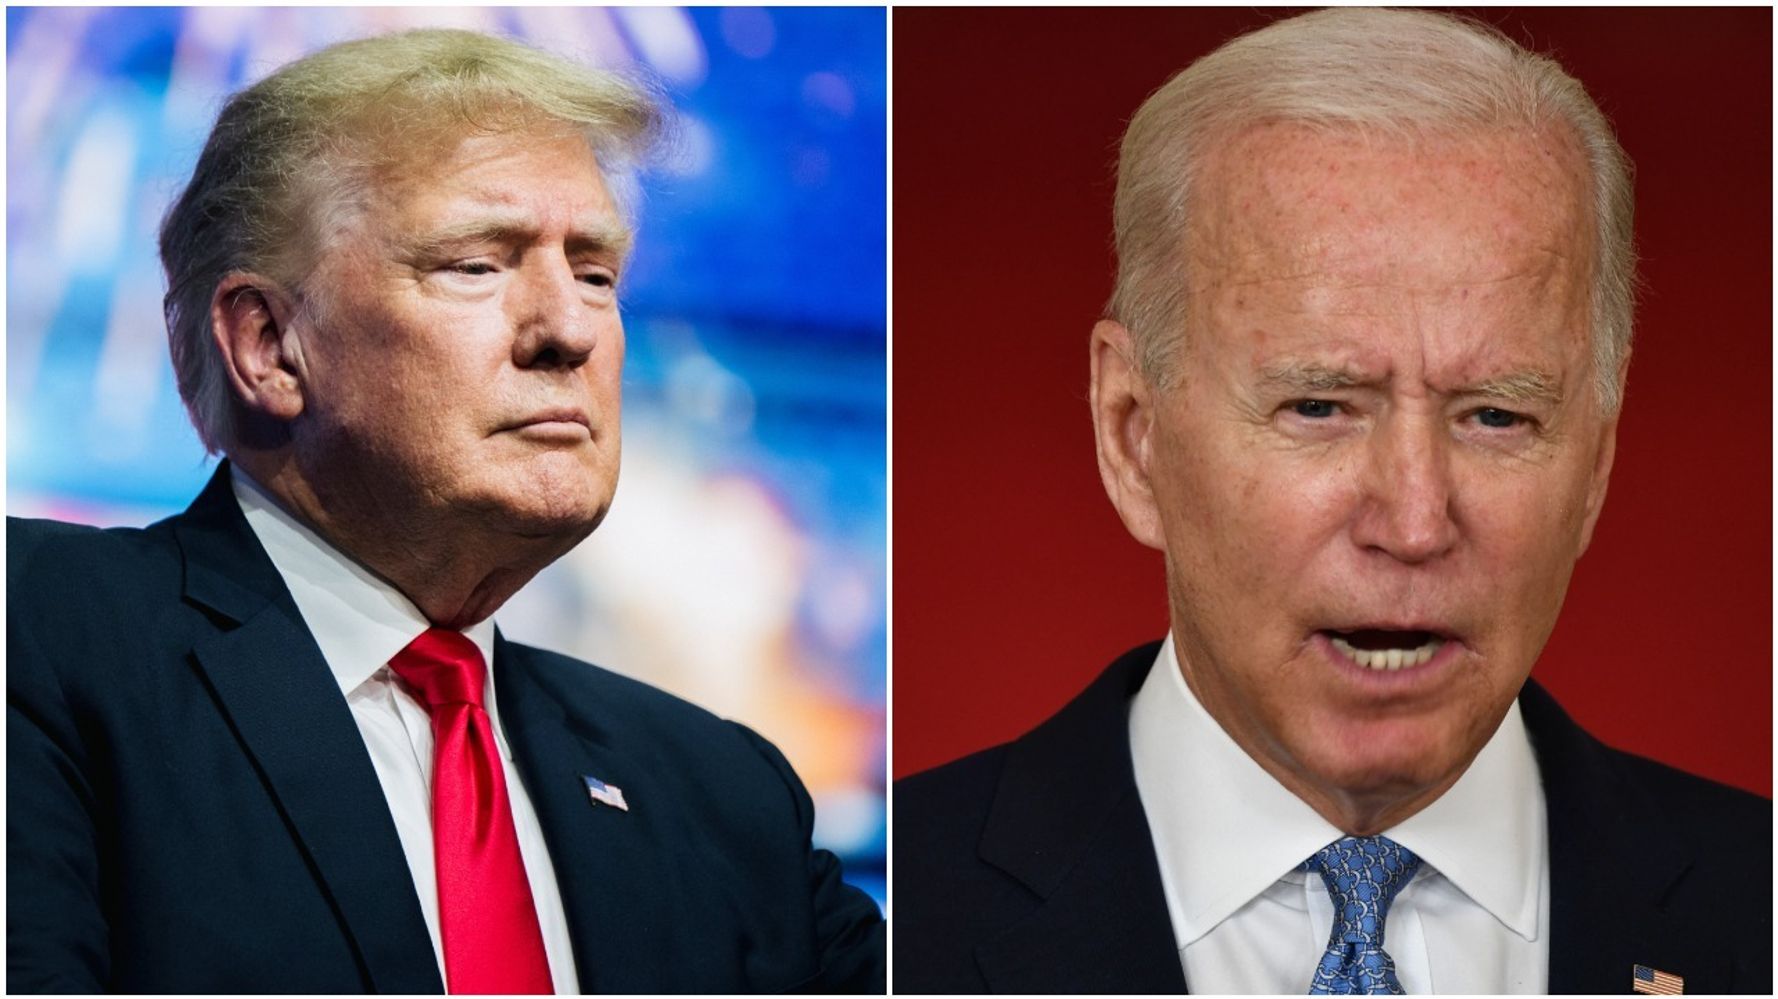 Trump Promotes 9/11 Boxing Match By Claiming He Could Beat Biden